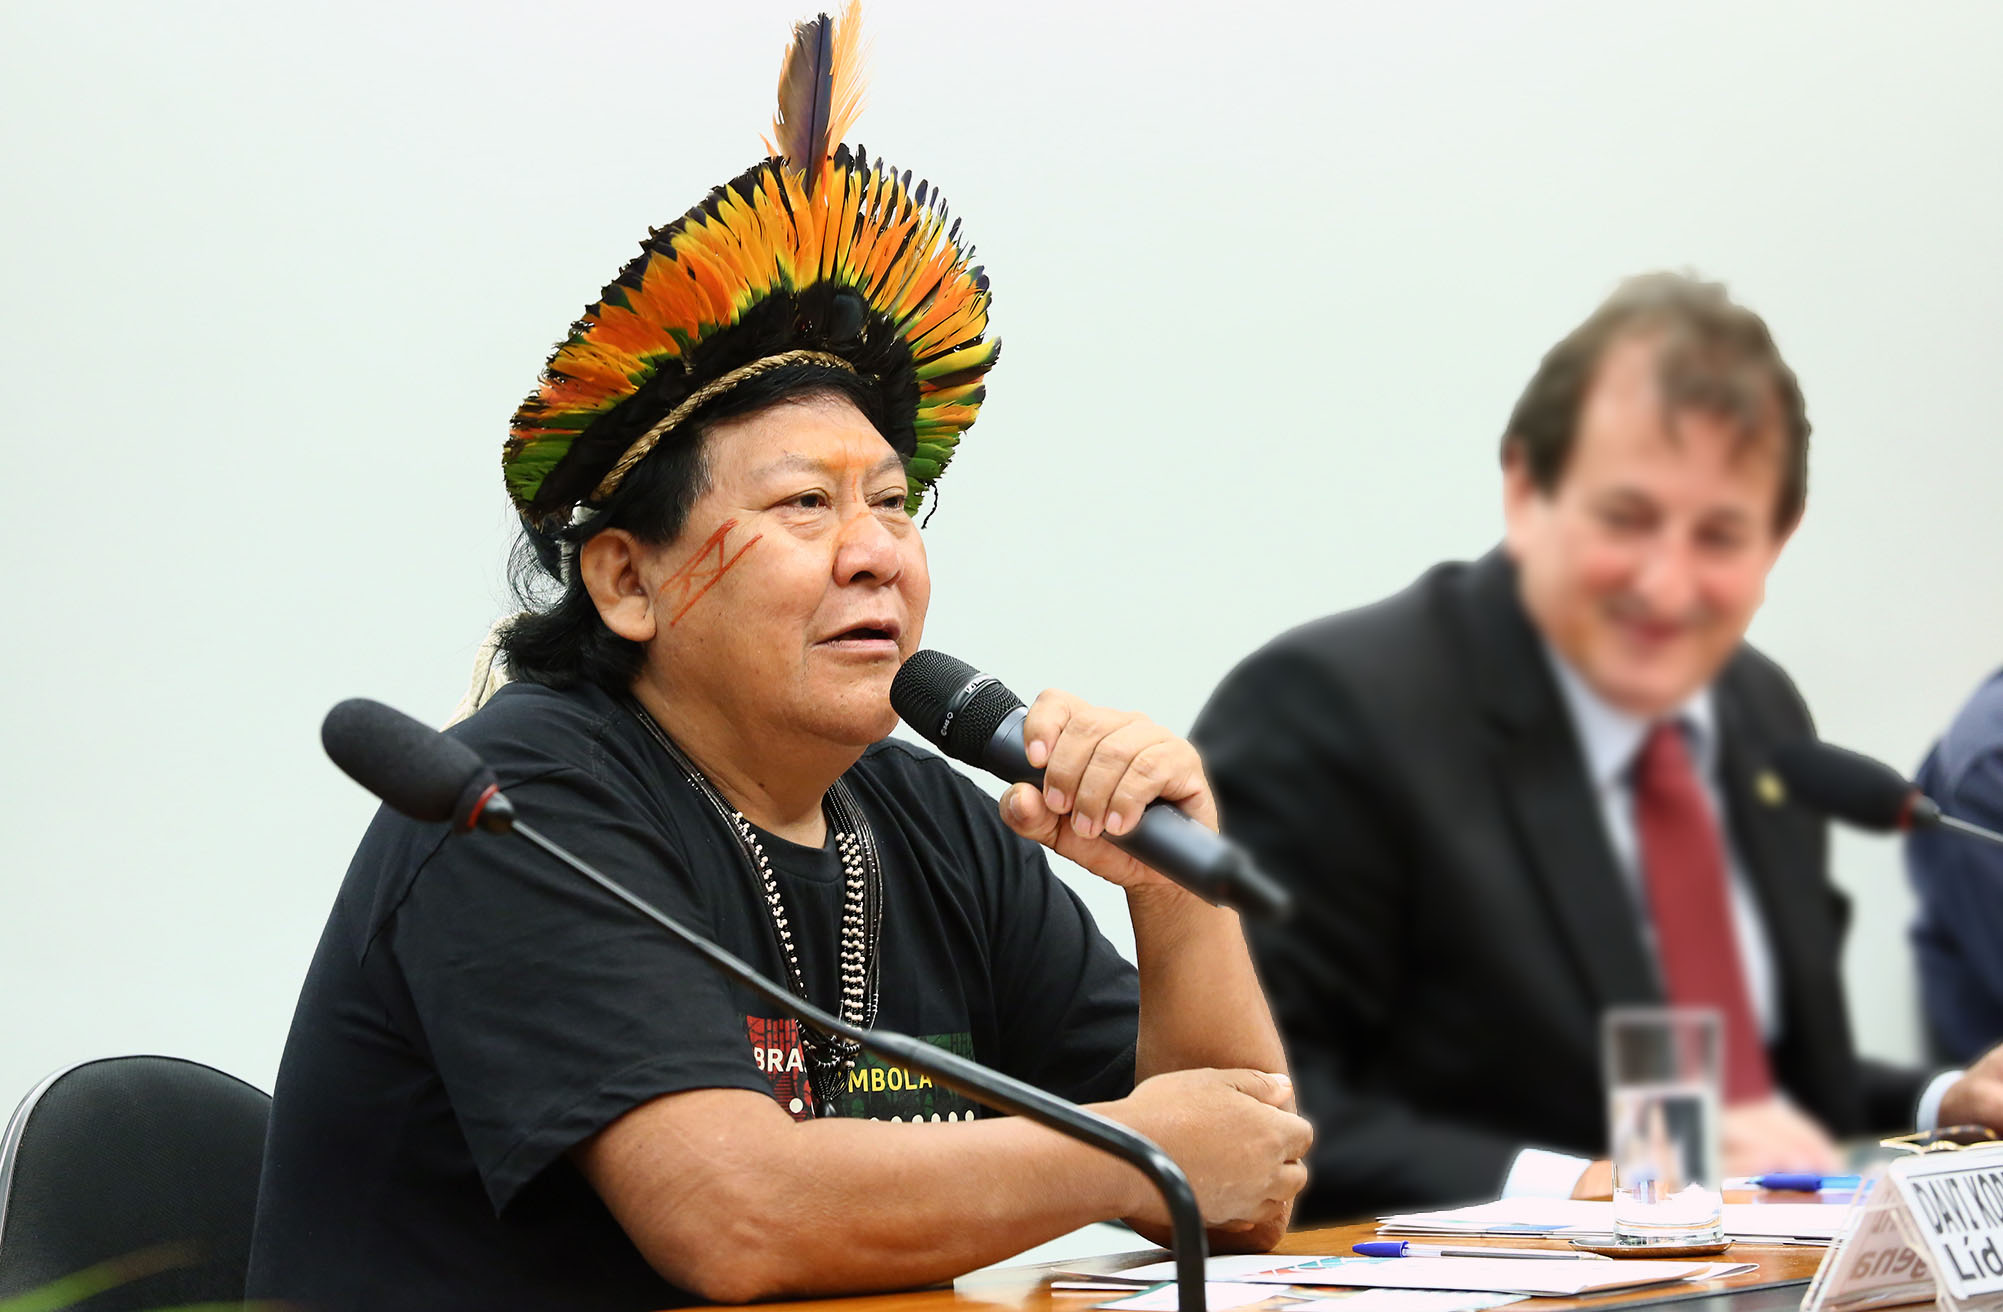 The Yanomami indigenous leader Davi Kopenawa at an event in the Lower House of Congress in 2019 (Photo: Cleia Viana/Lower House of Congress)
